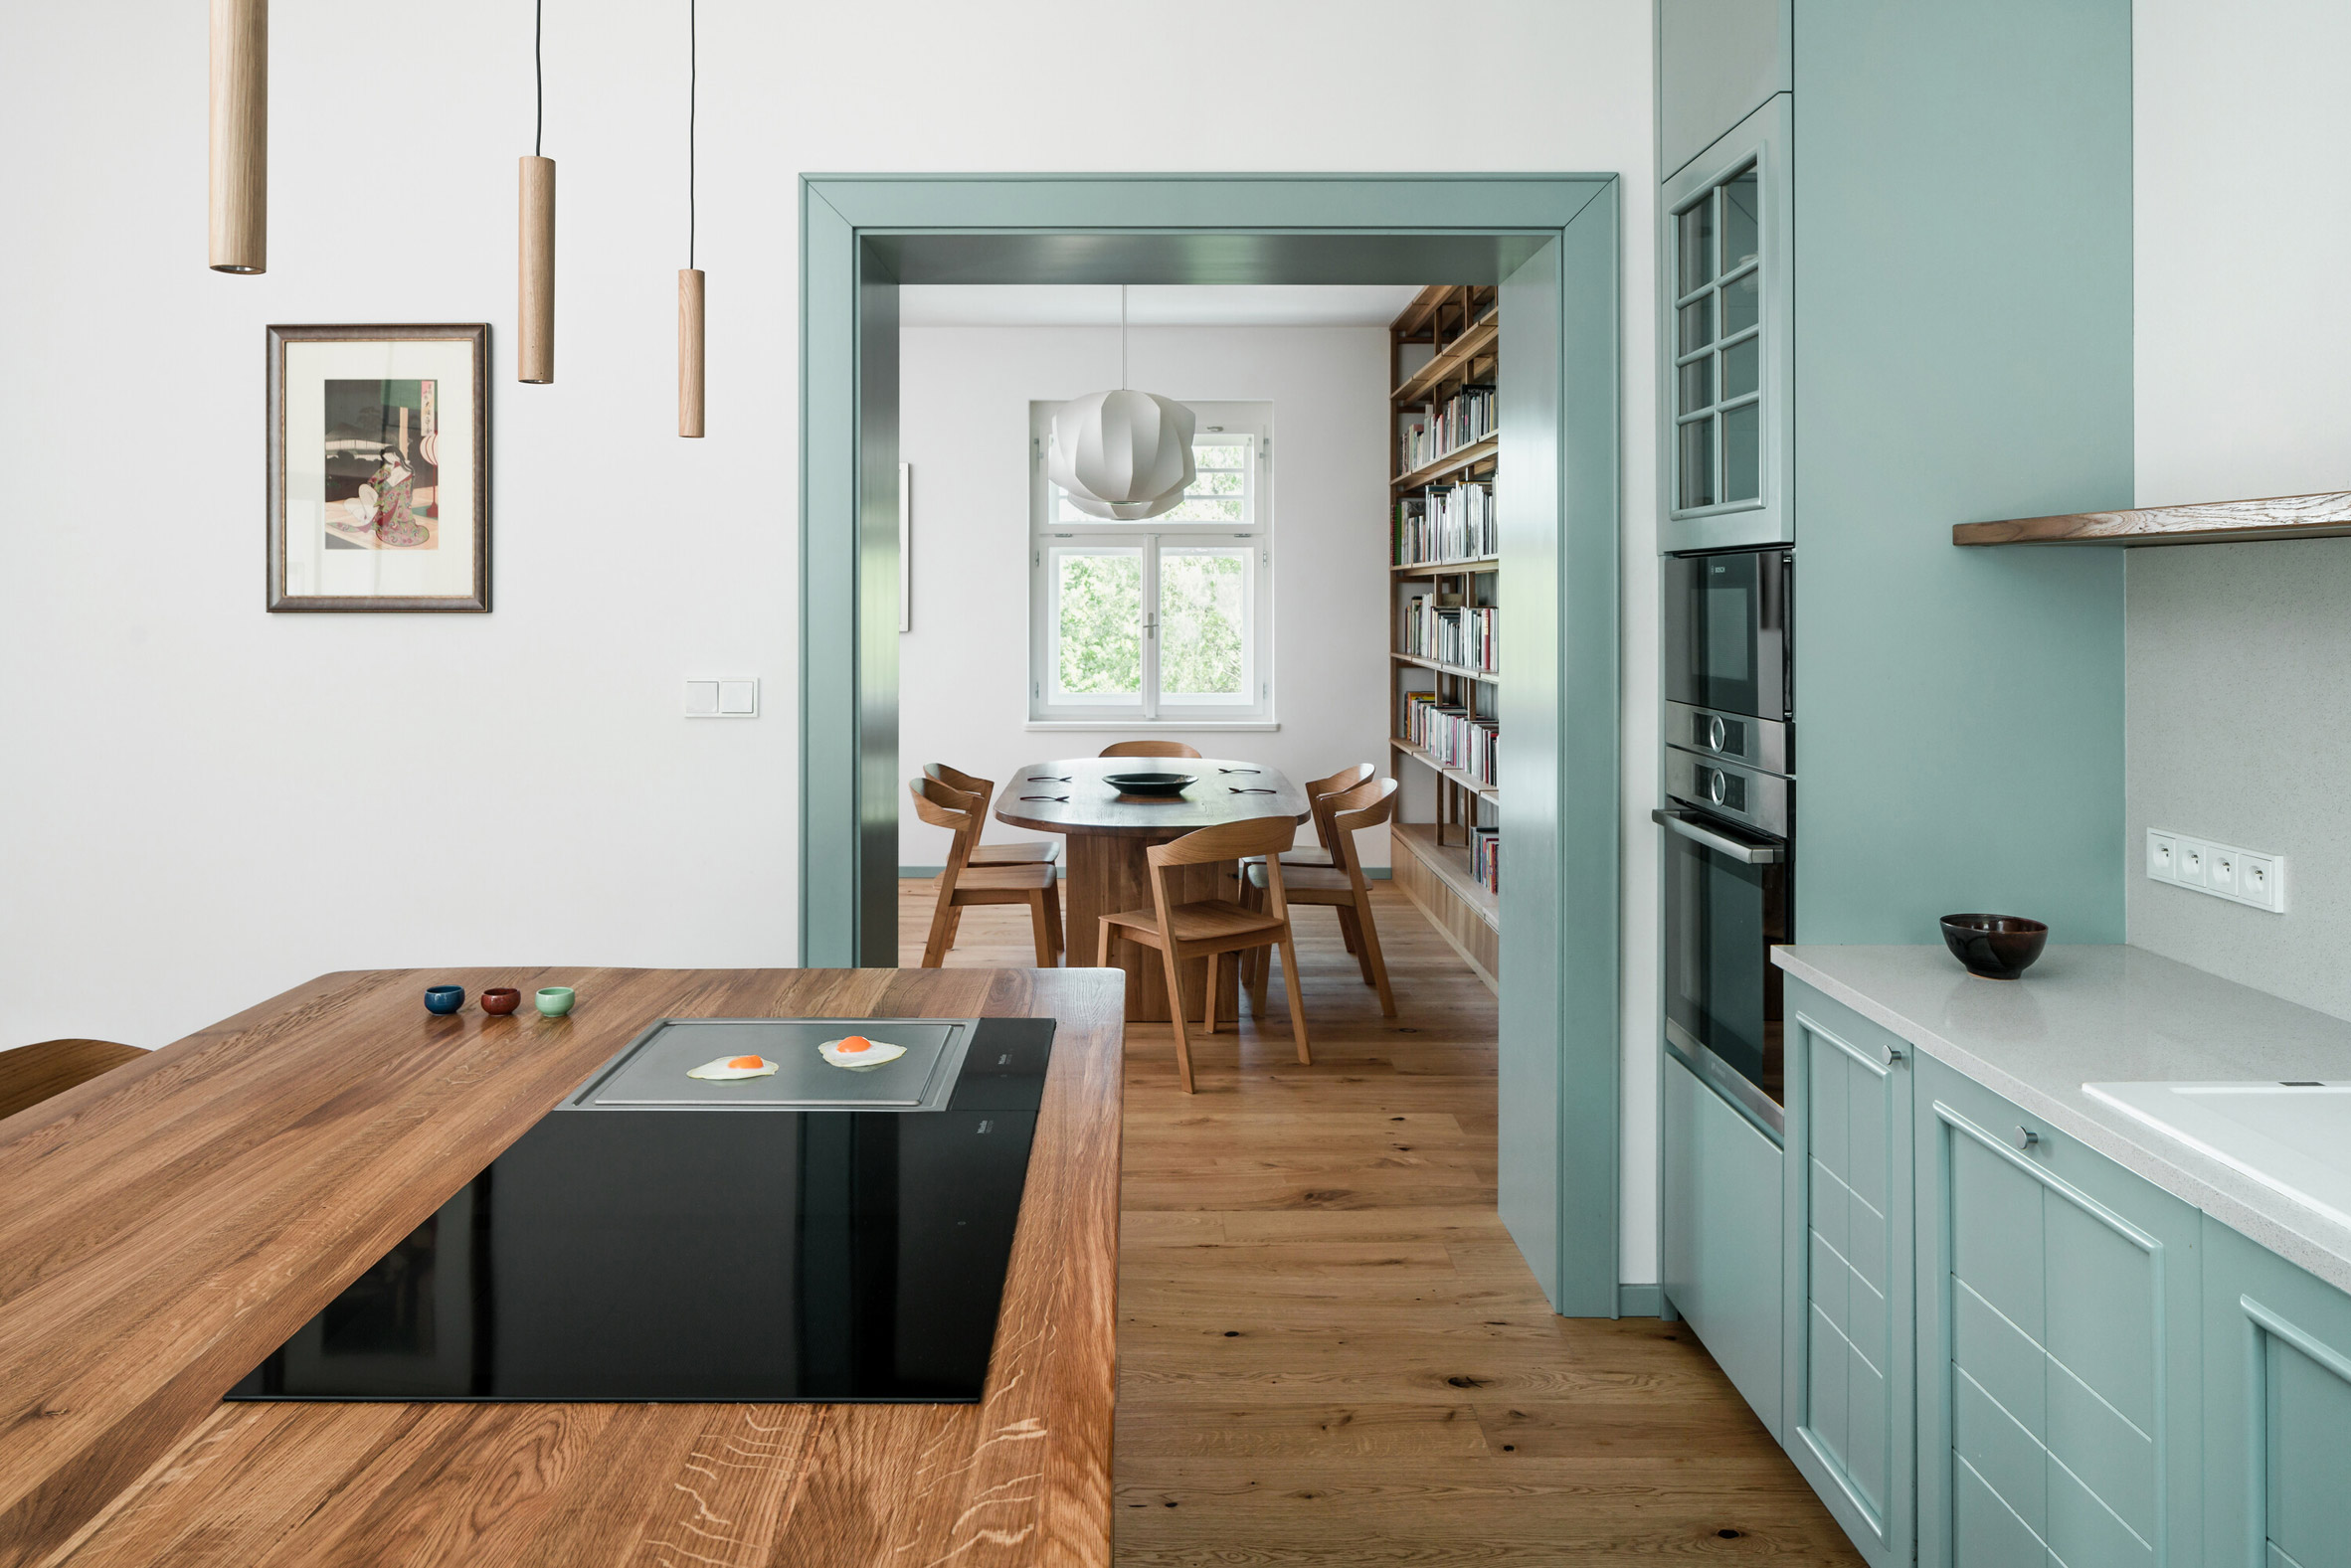 Interior of the kitchen at Under The Top house by No Architects